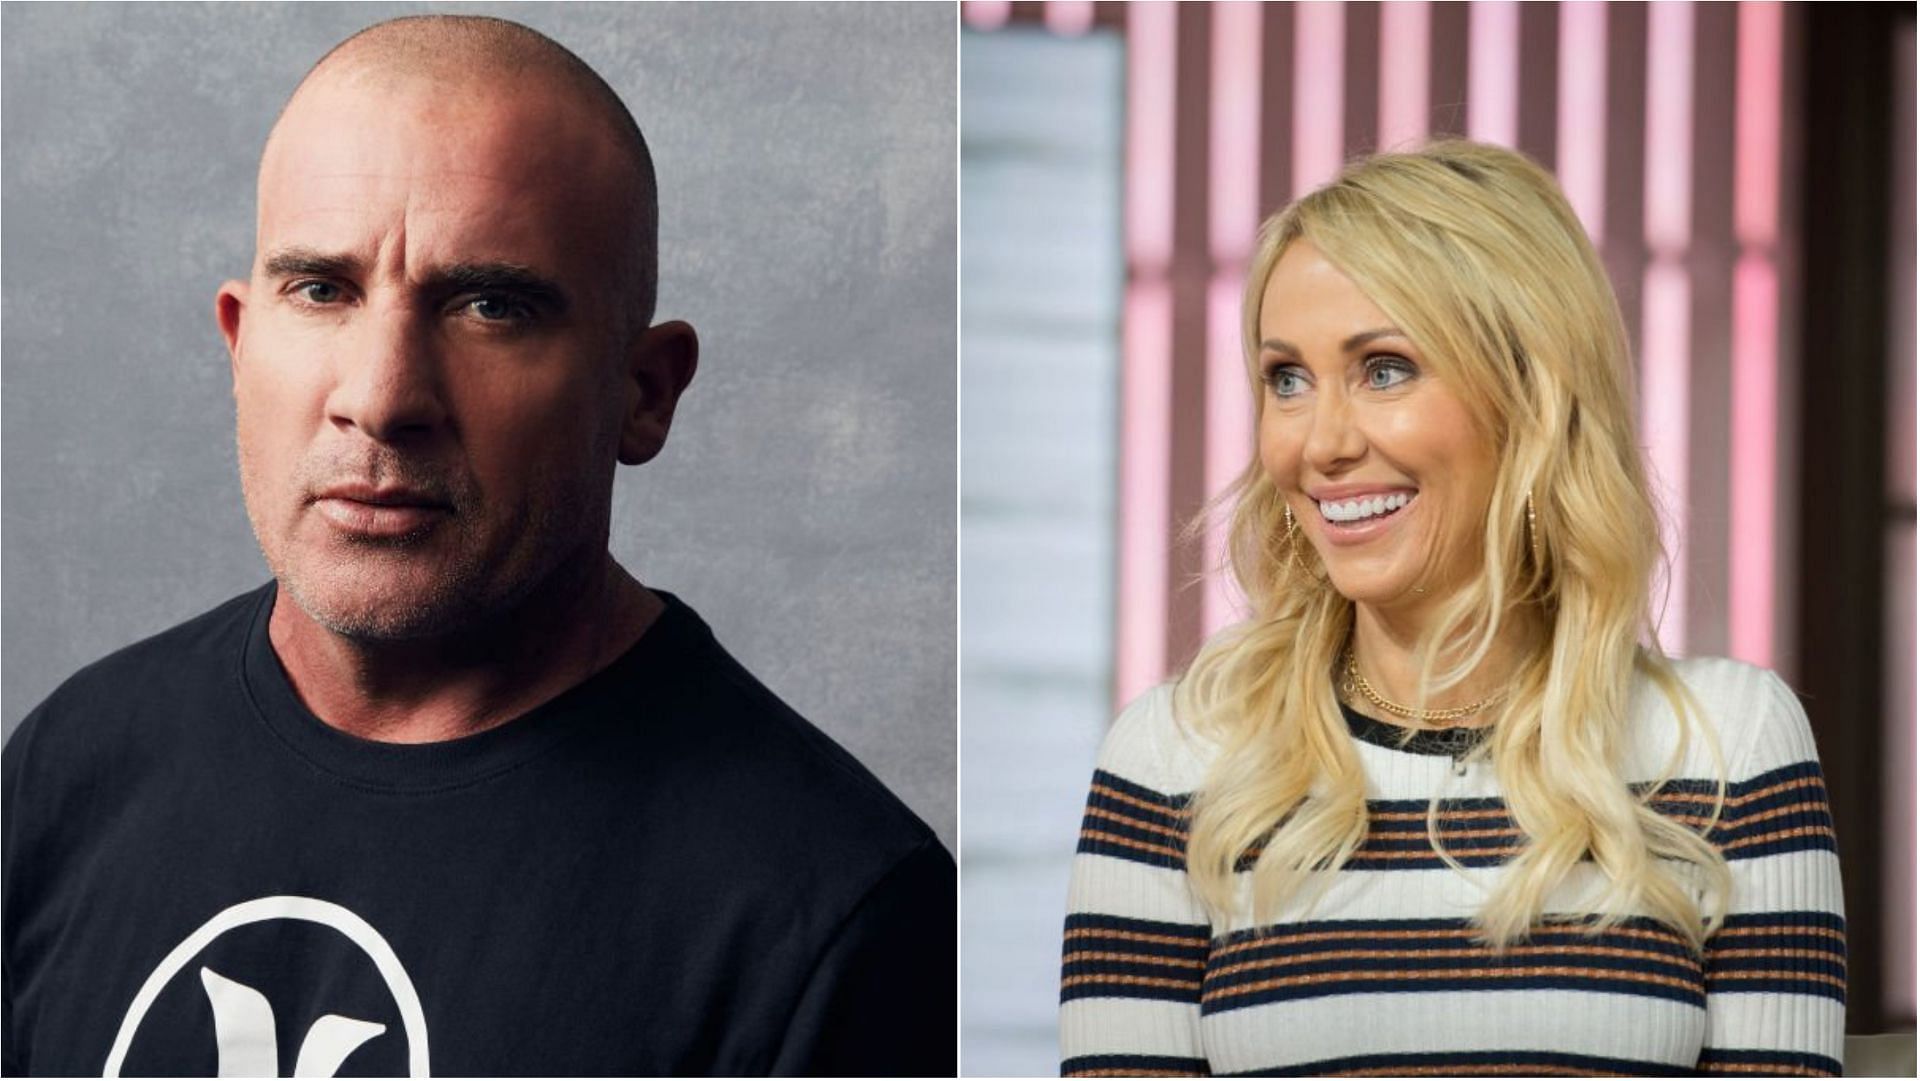 Dominic Purcell and Tish Cyrus were spotted together in a picture (Images via Robby Klein and Nathan Congleton/Getty Images)